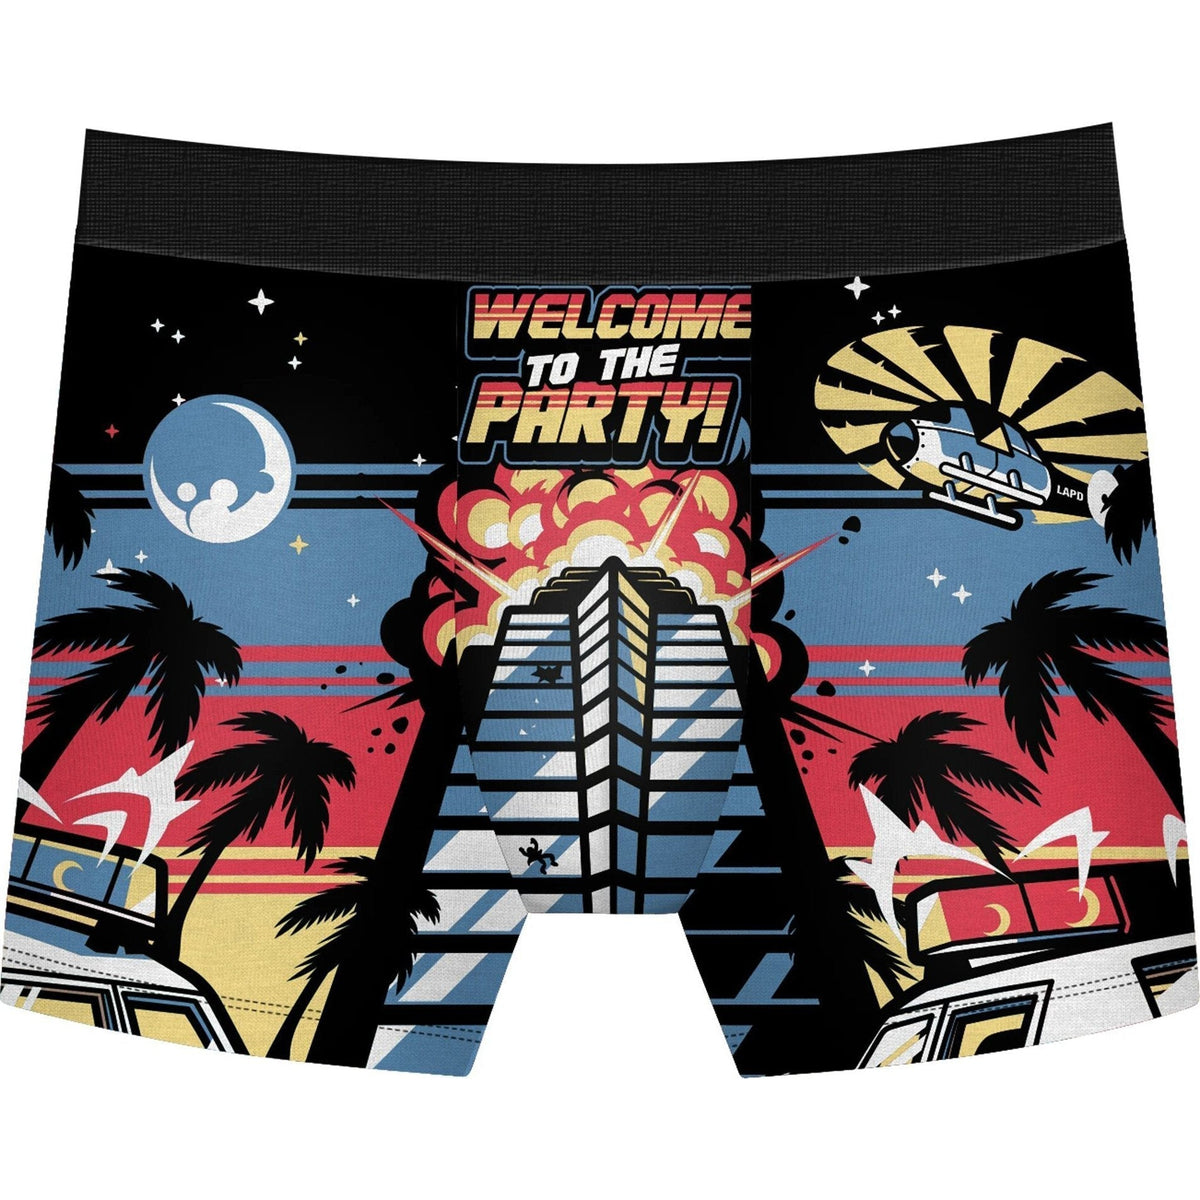 Welcome To The Party, Pal Mens Boxer Briefs-Mens Underwear-Scarlett Dawn